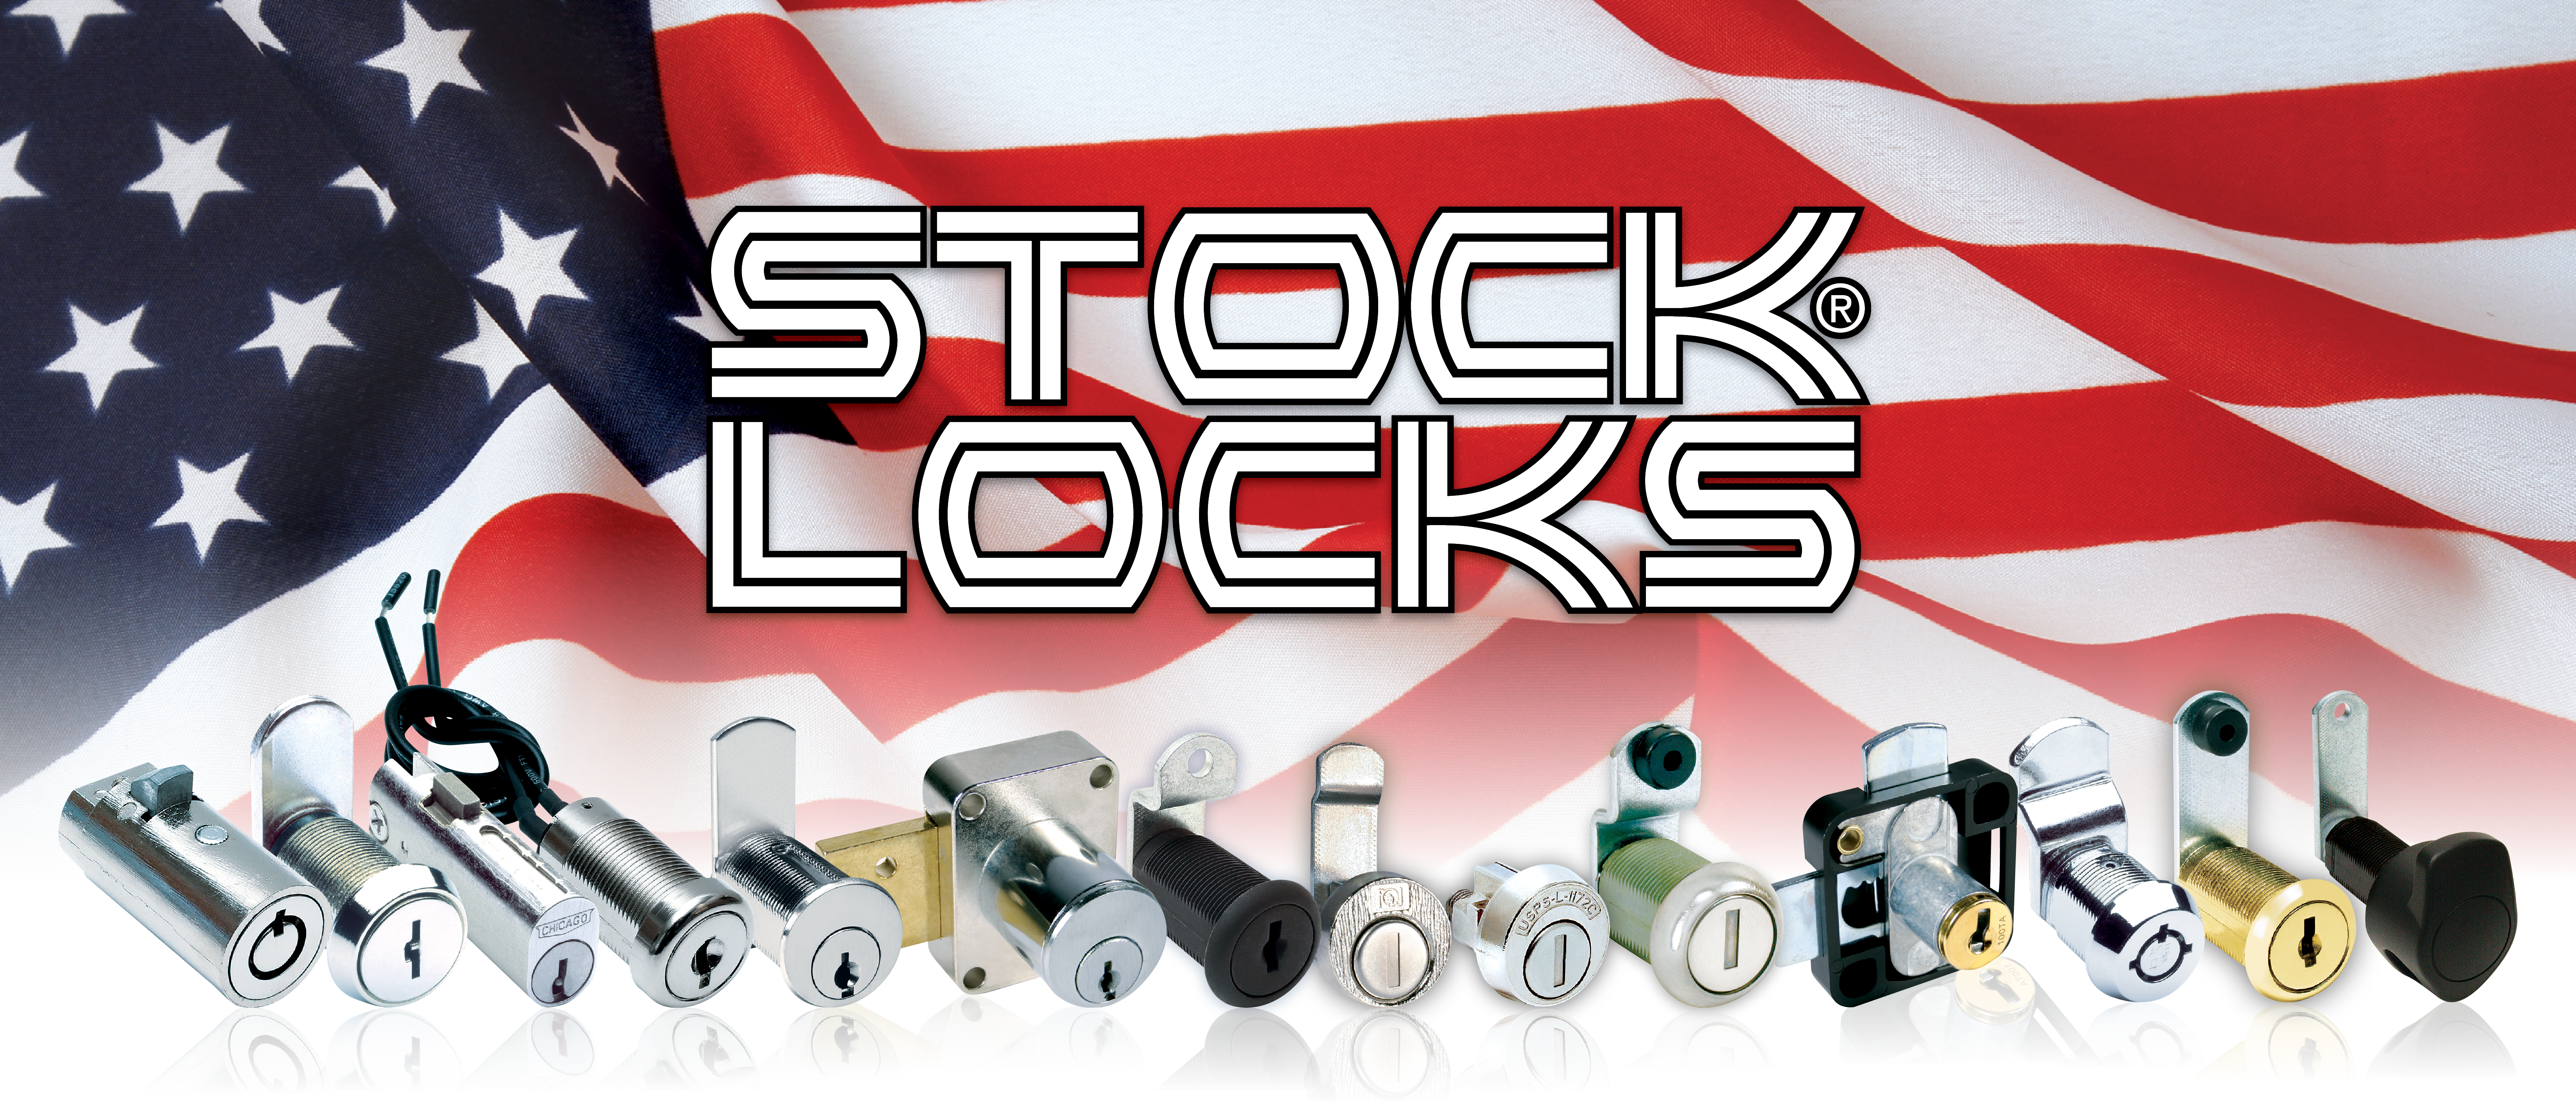 STOCK LOCKS product lineup and US flag